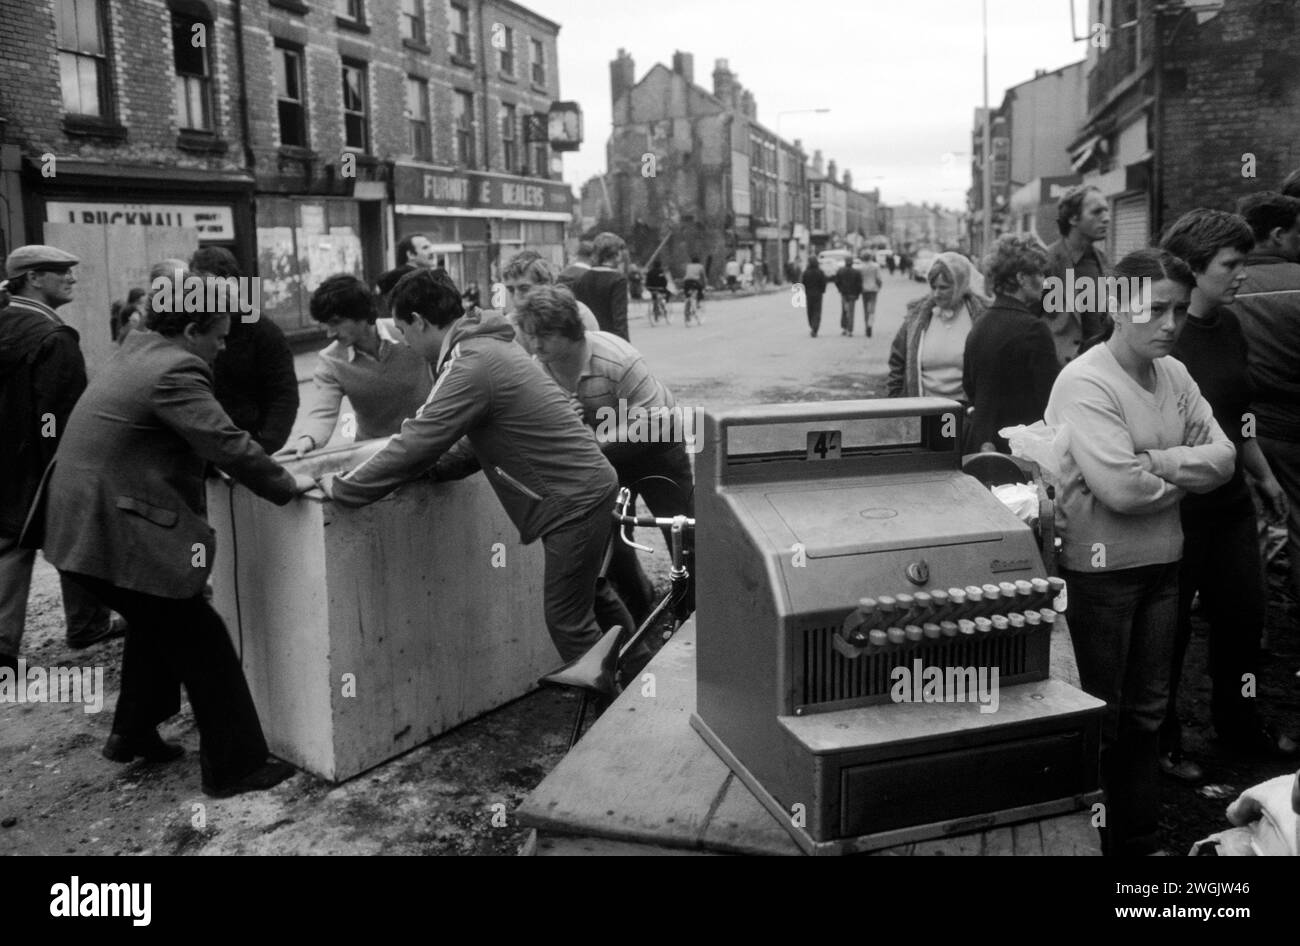 Toxteth Riots, Liverpool, England July 1981. The morning after night of riots, local men helping themselves to the contents of a burn out shop. They are looting. A shop keepers till, with the 4 shillings sign, local residents are upset at what has happened to their neighbourhood. 1980s UK> HOMER SYKES Stock Photo